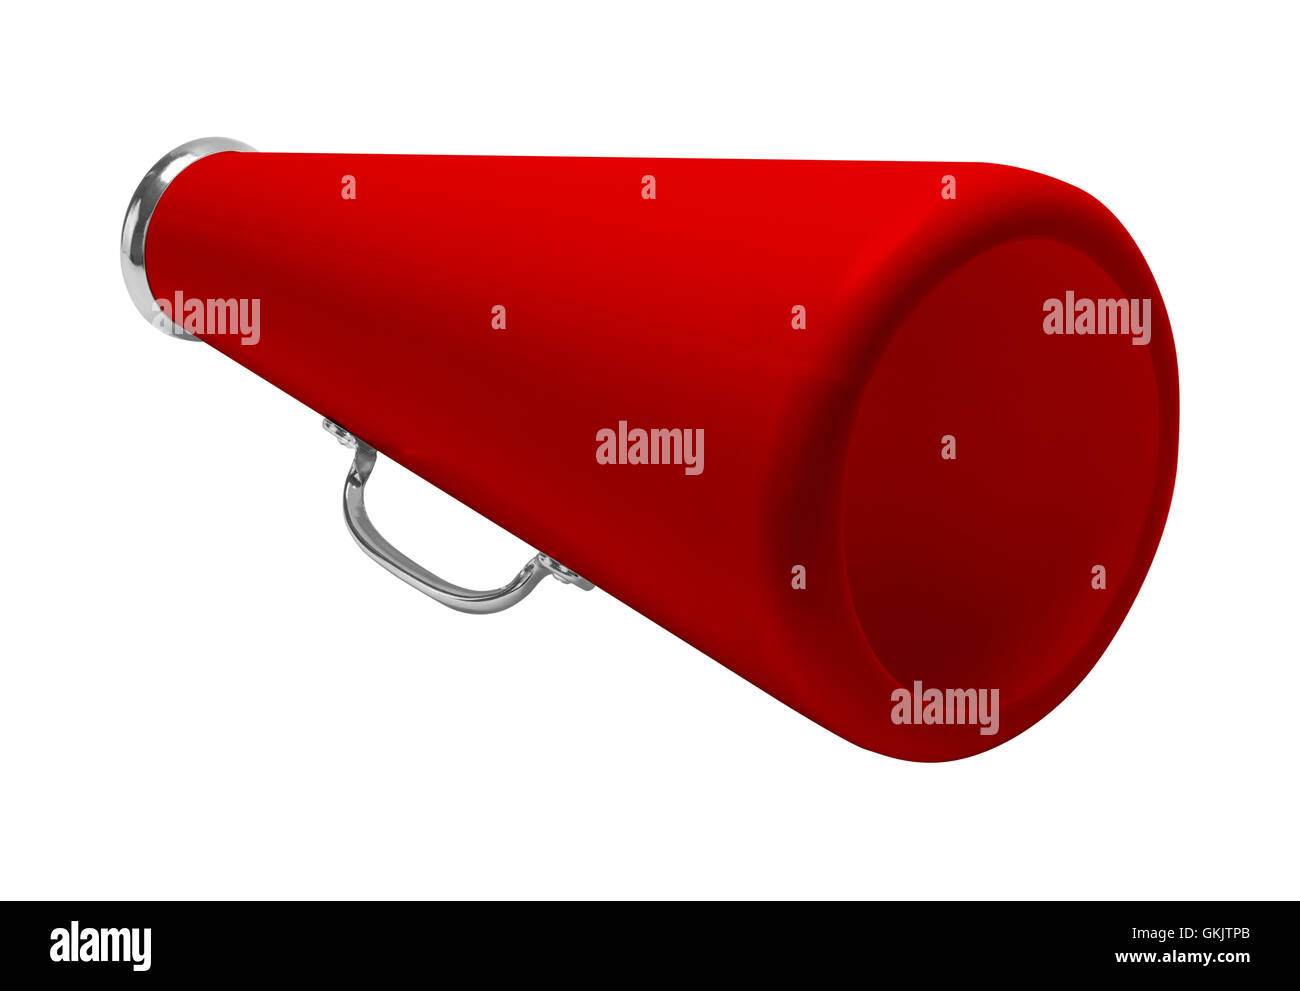 Red Cheer Megaphone Cut Out and Isolated on White Background. Stock Photo